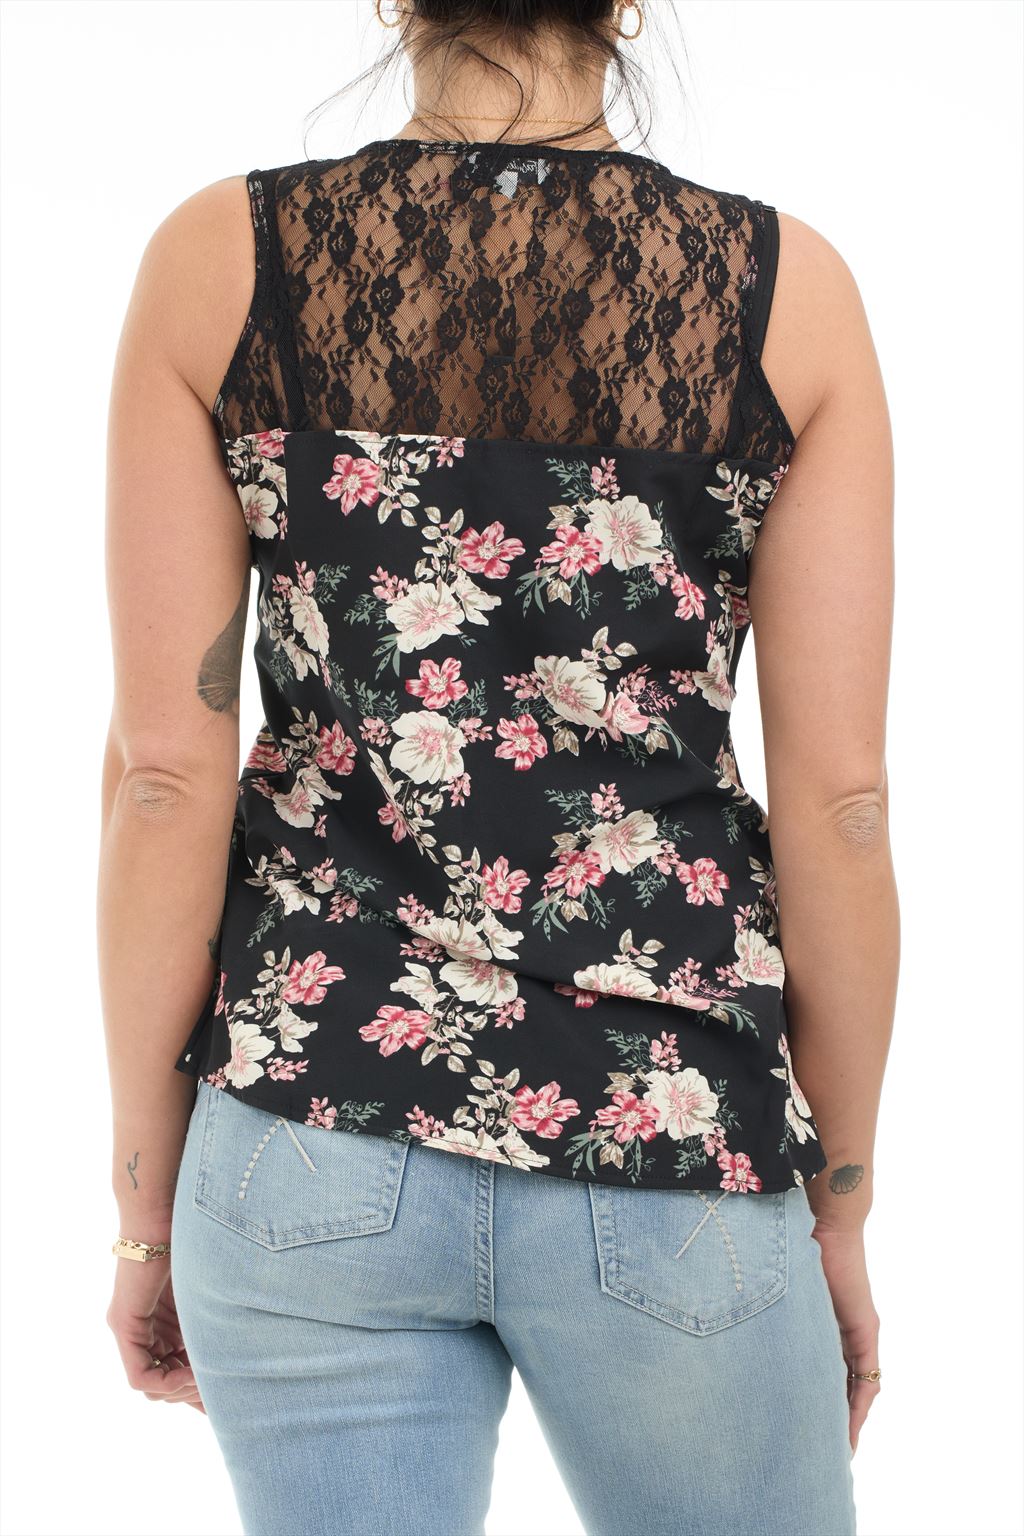 Floral blouse with zipper